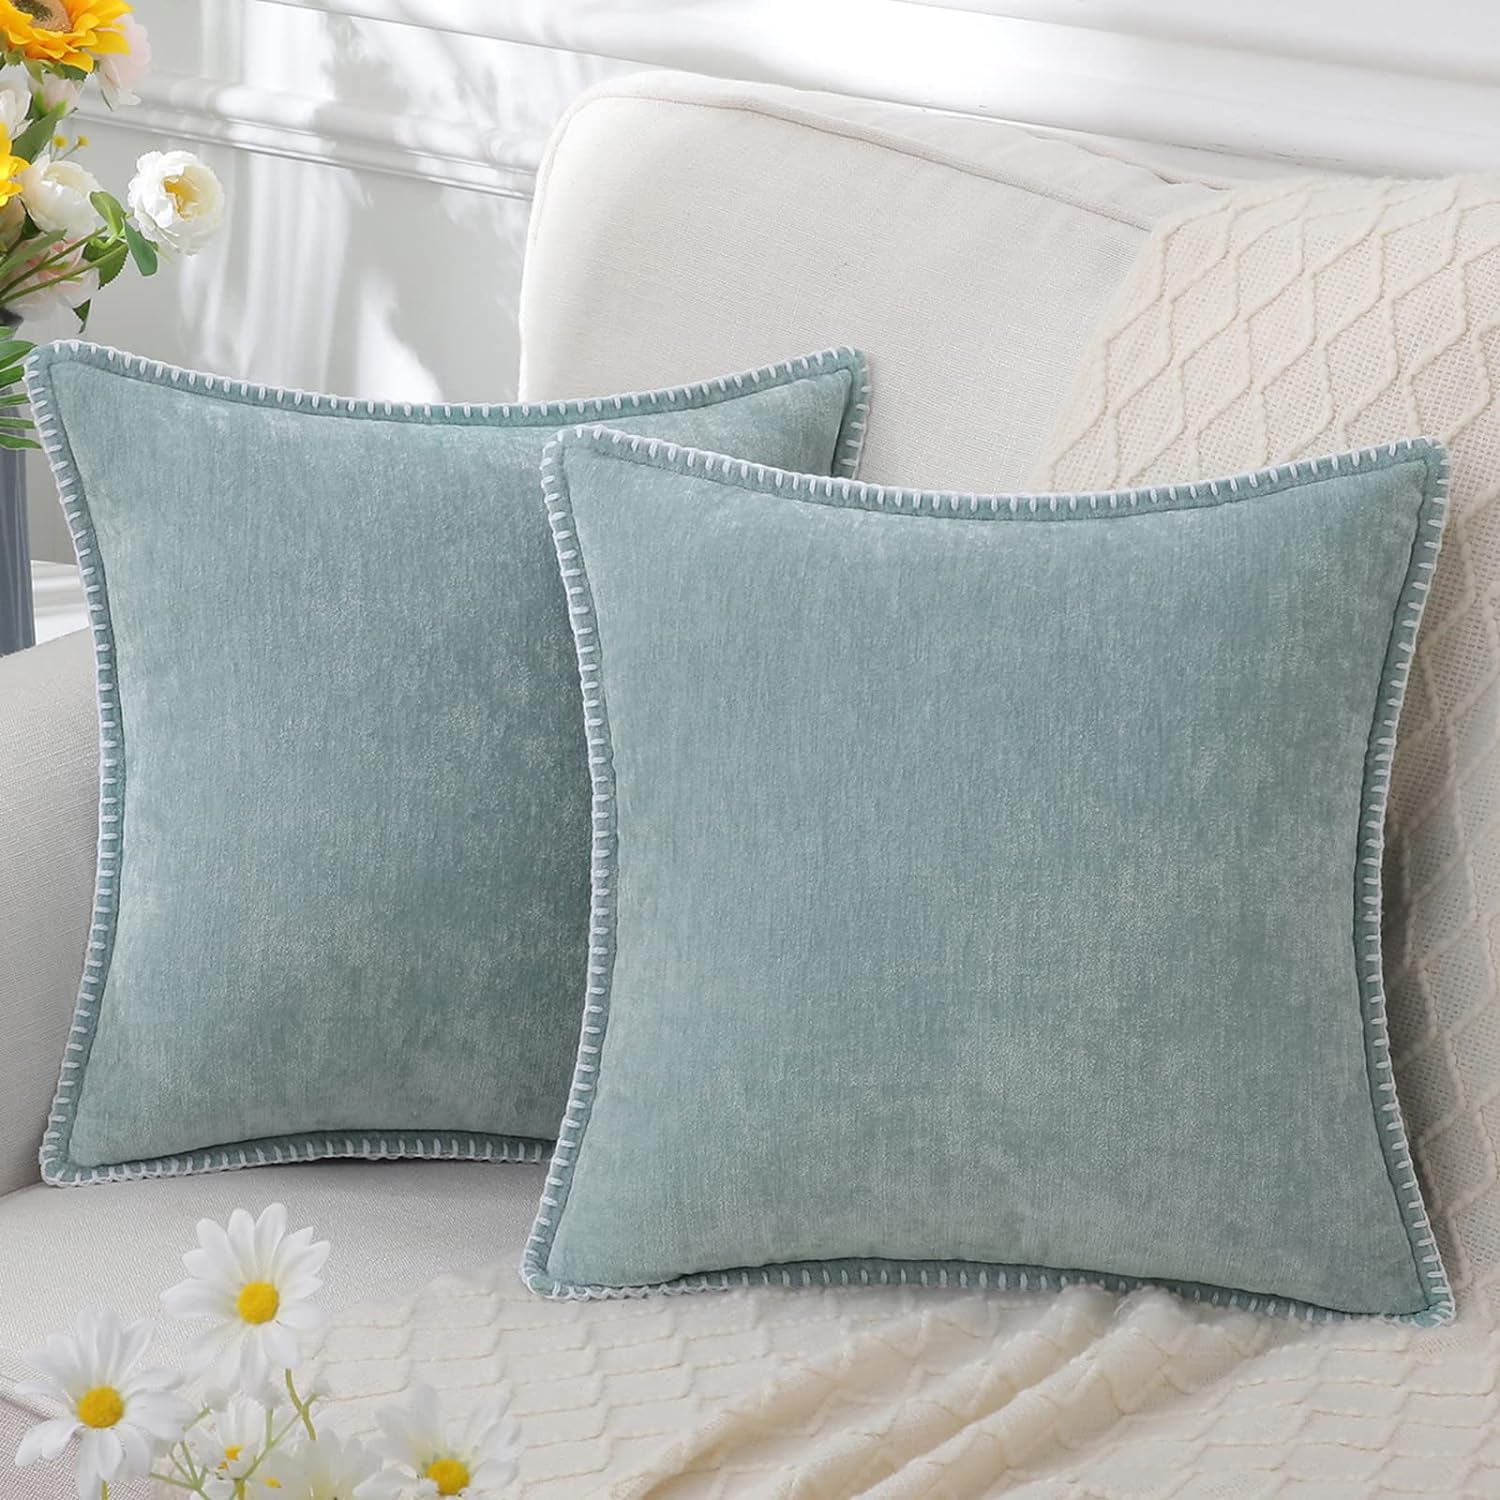  decorUhome Chenille Soft Throw Pillow Covers 18x18 Set of 2, Farmhouse Velvet Pillow Covers, Decorative Square Pillow Covers with Stitched Edge for Couch Sofa Bed, Aqua Haze 